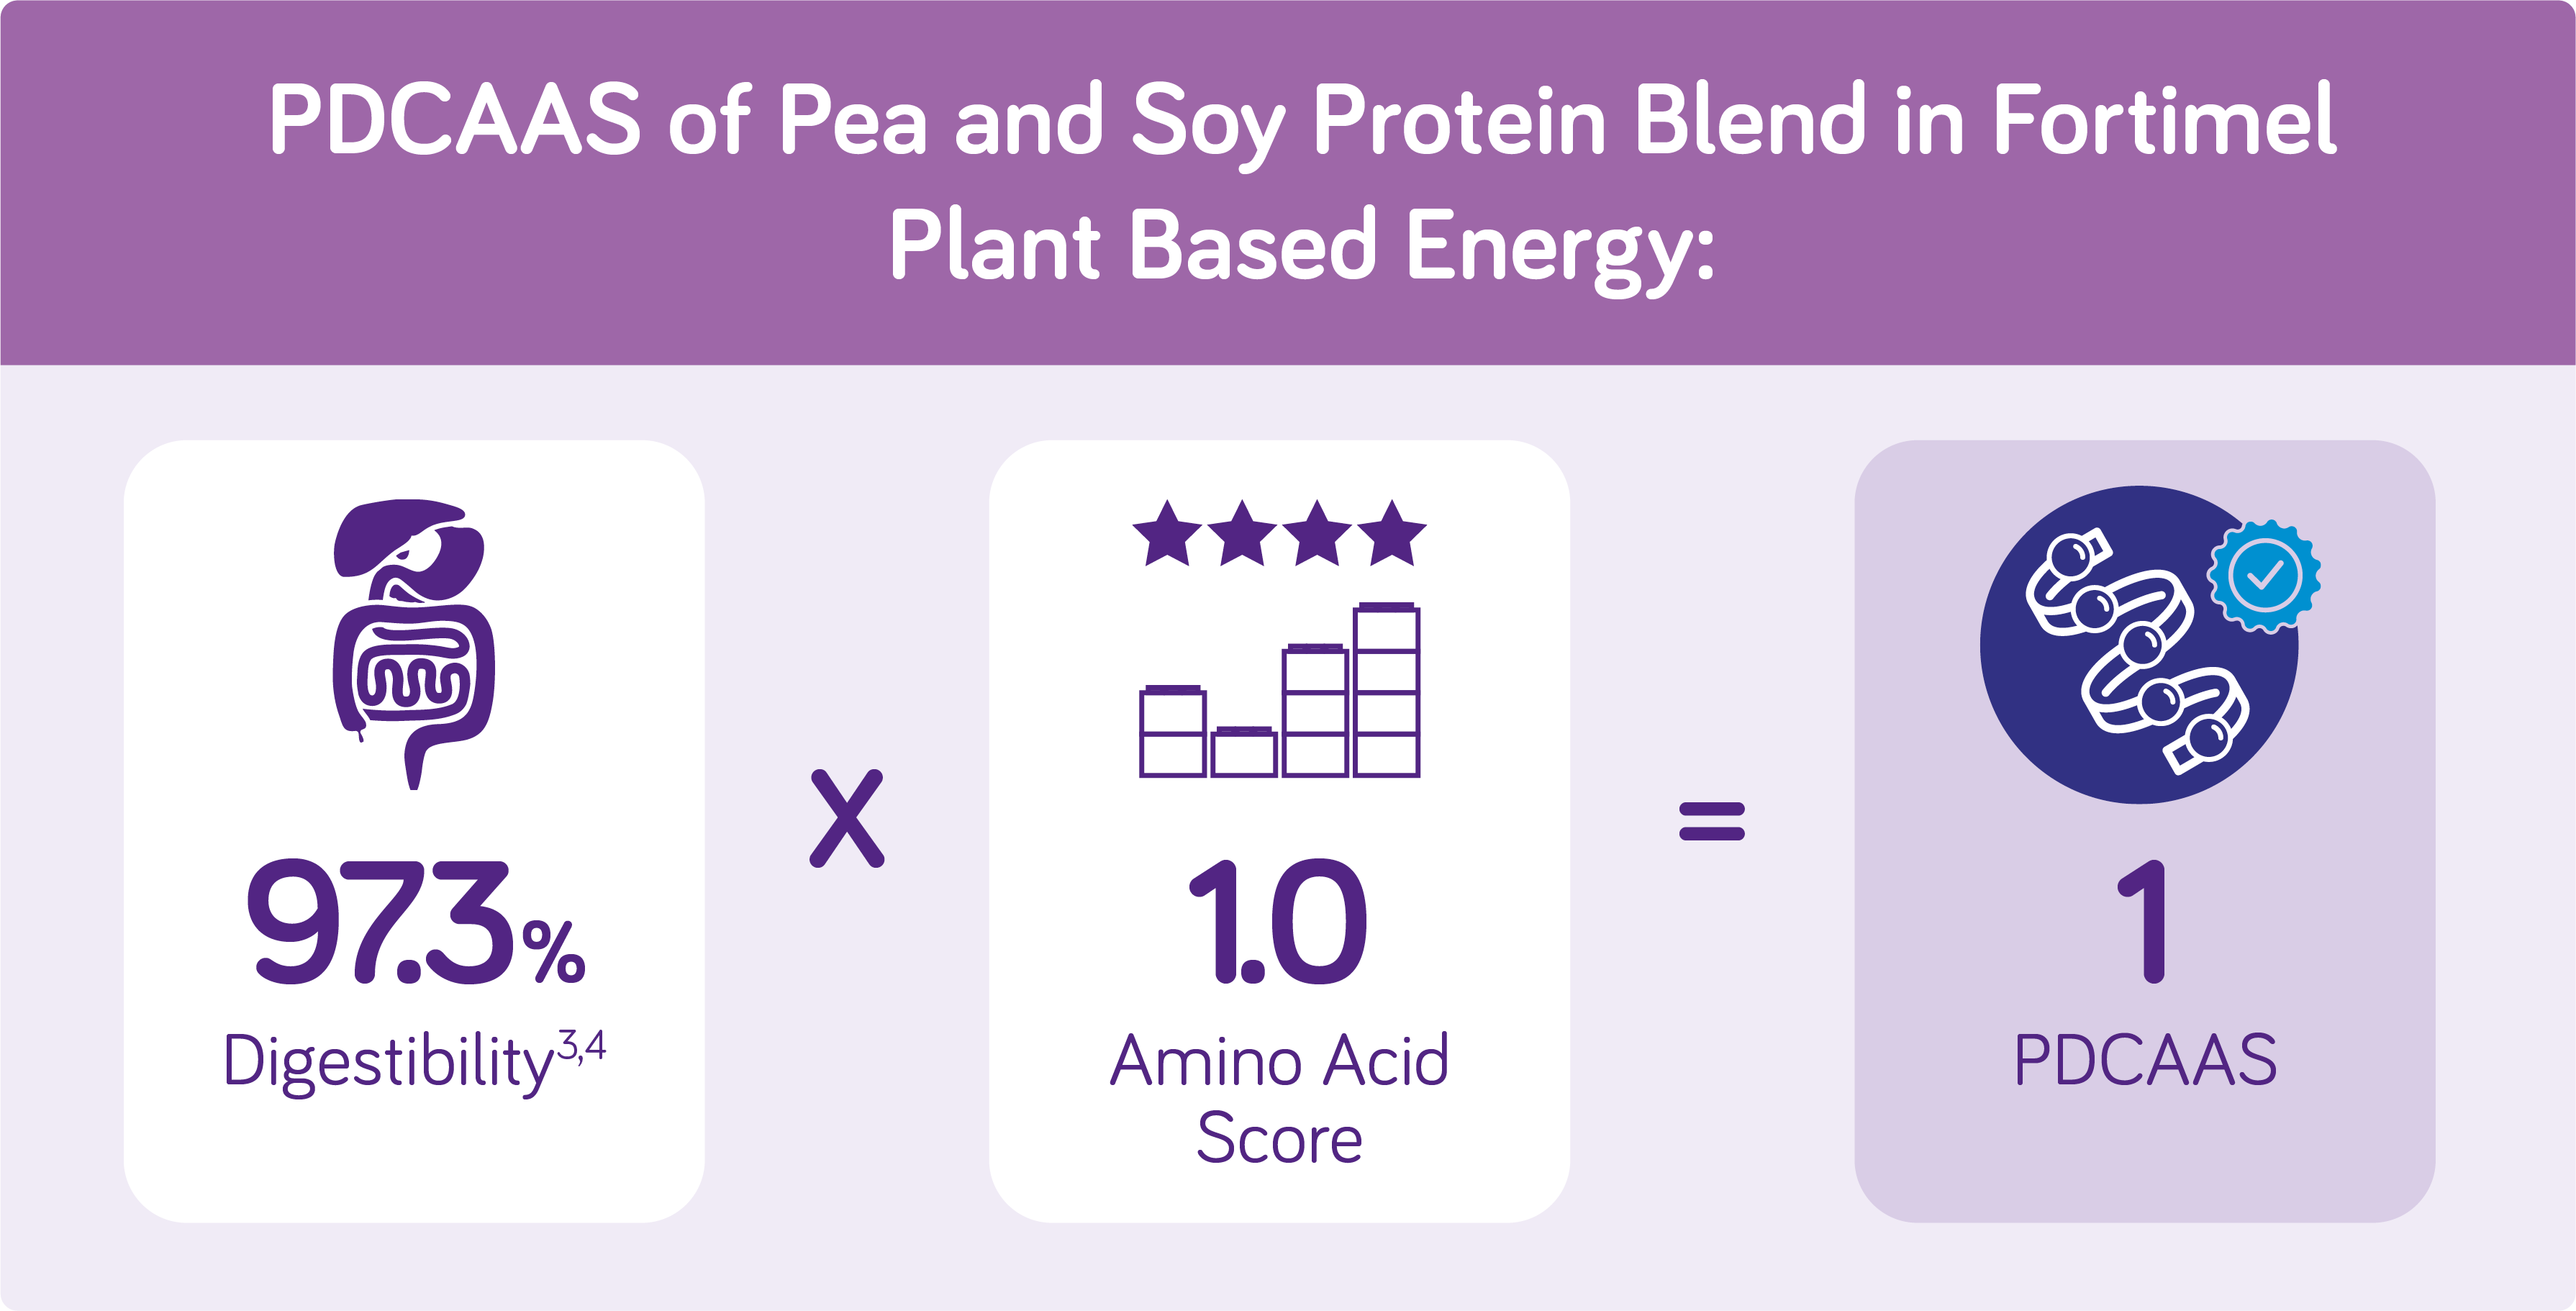 PDCAAS of Pea and Soy Protein Blend in Fortimel PlantBased Energy